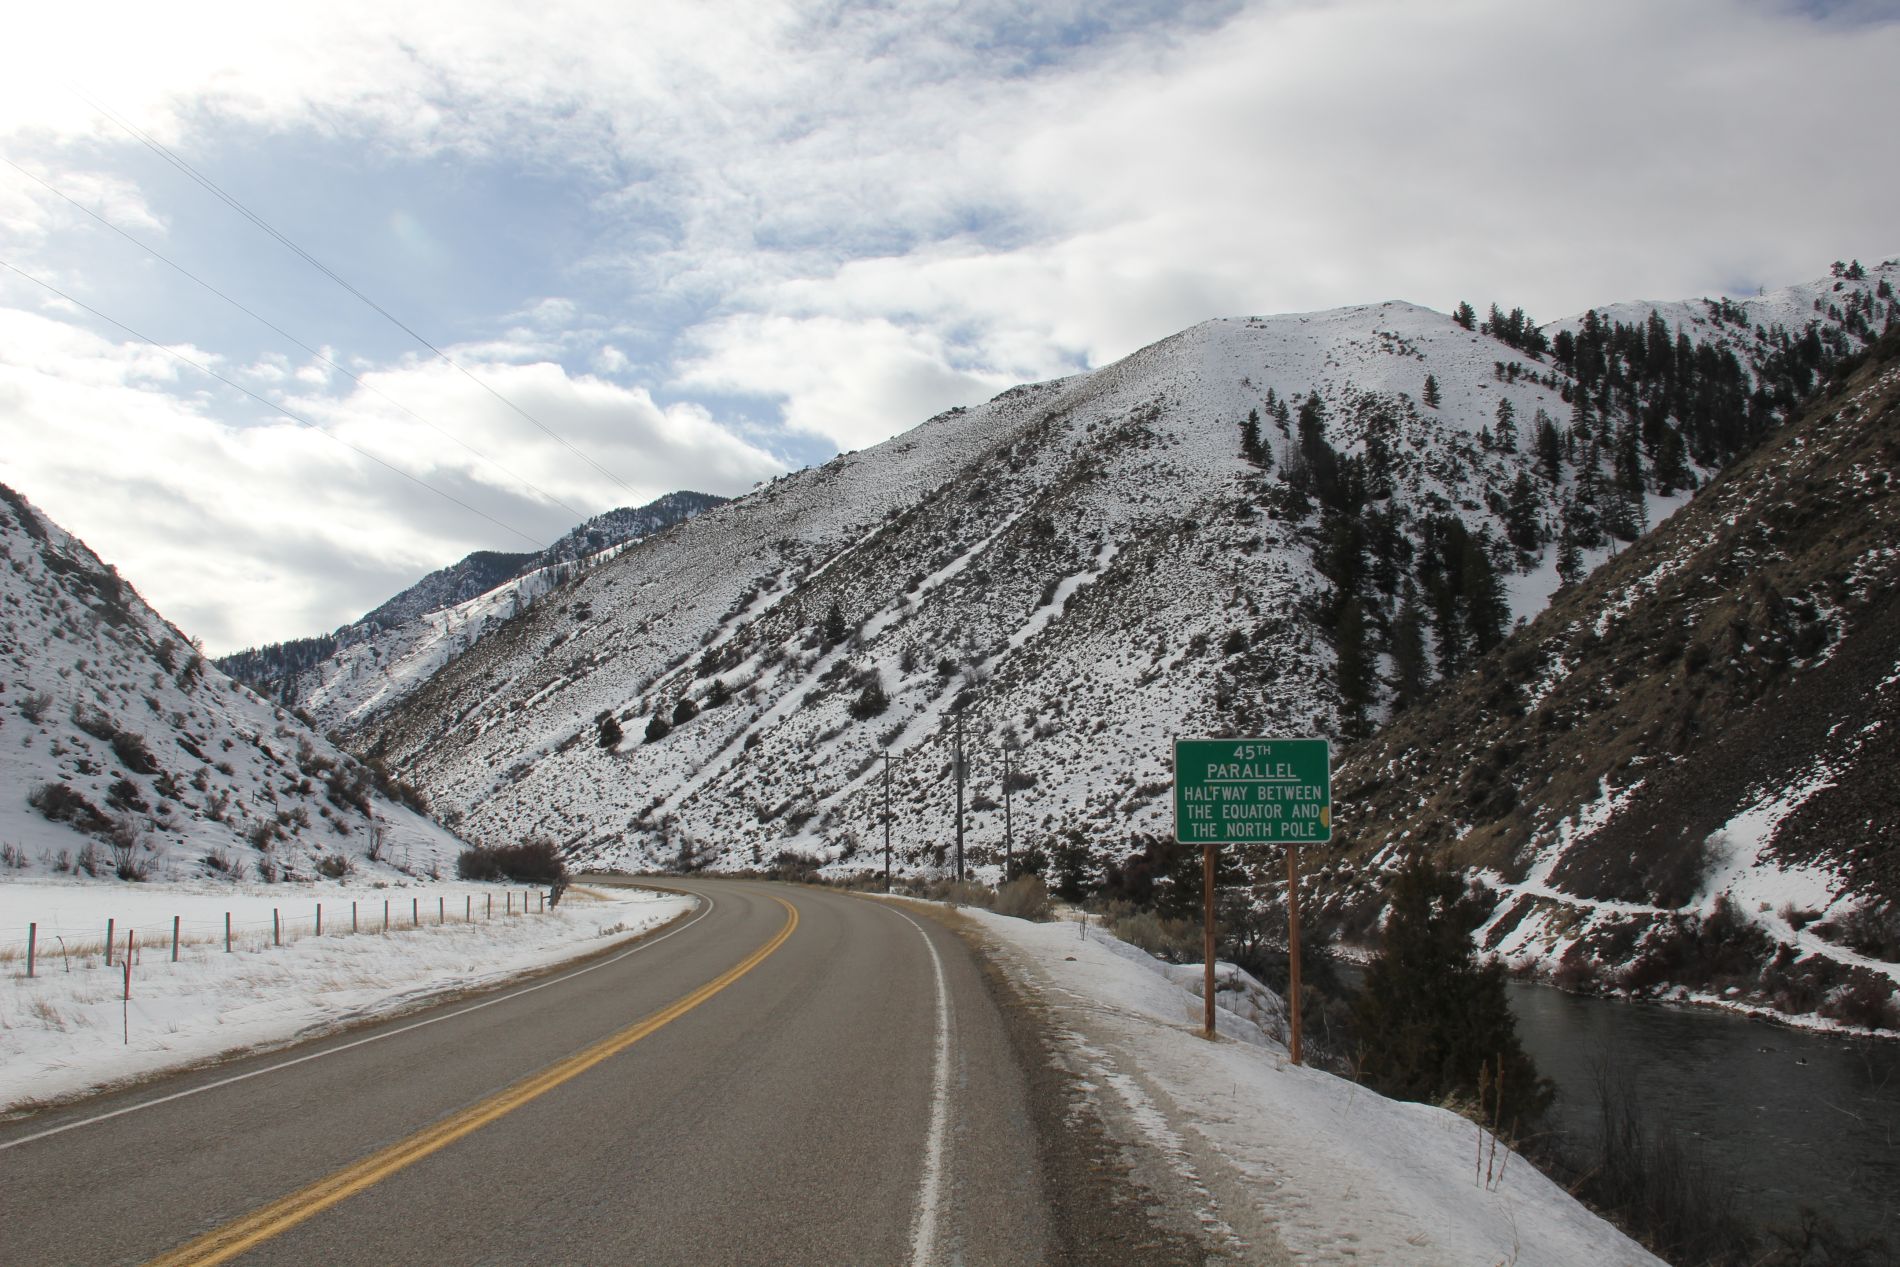 45th Parallel Sign in Sun Valley, Idaho